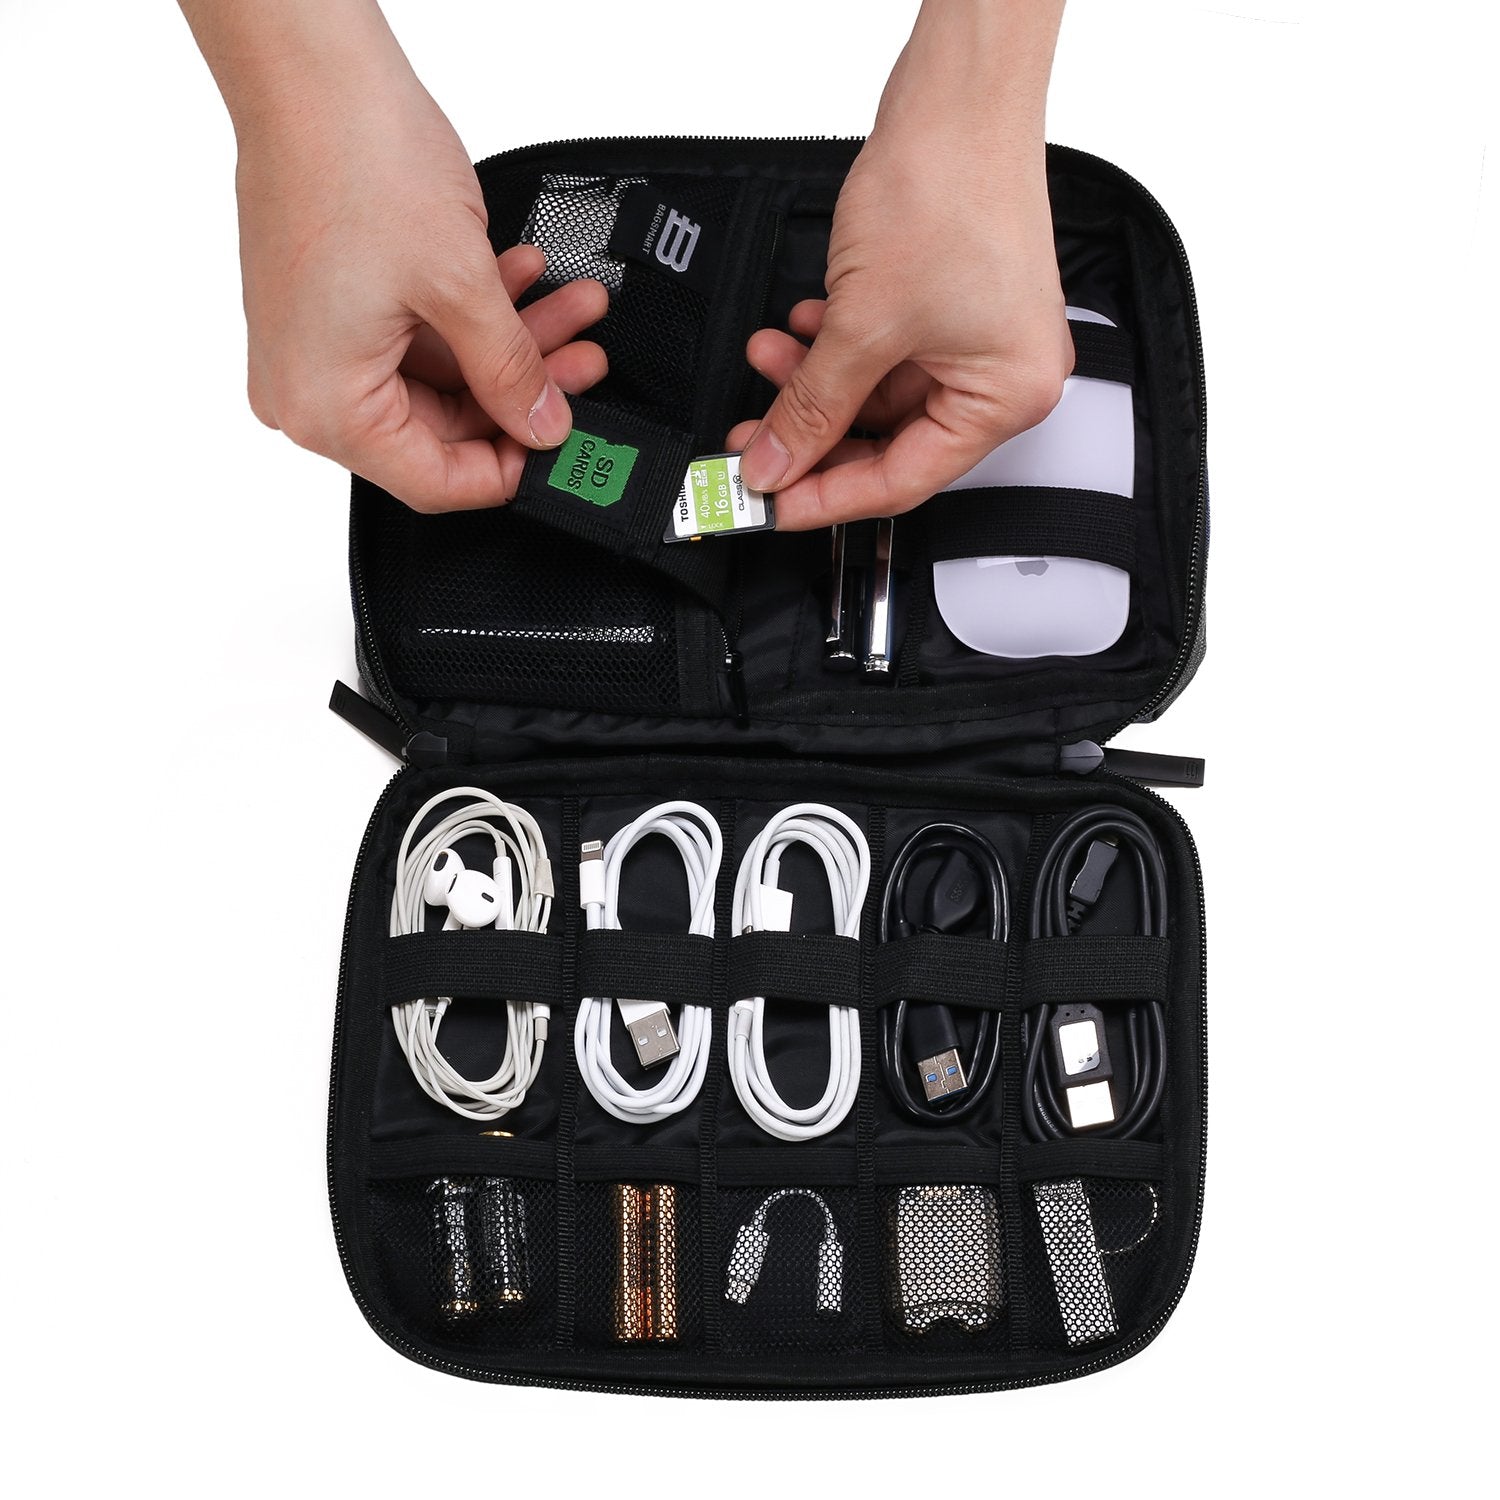 BAGSMART Electronic Organizer Small Travel Cable Organizer Bag for Hard Drives, Cables, Phone, USB, SD Card, Black